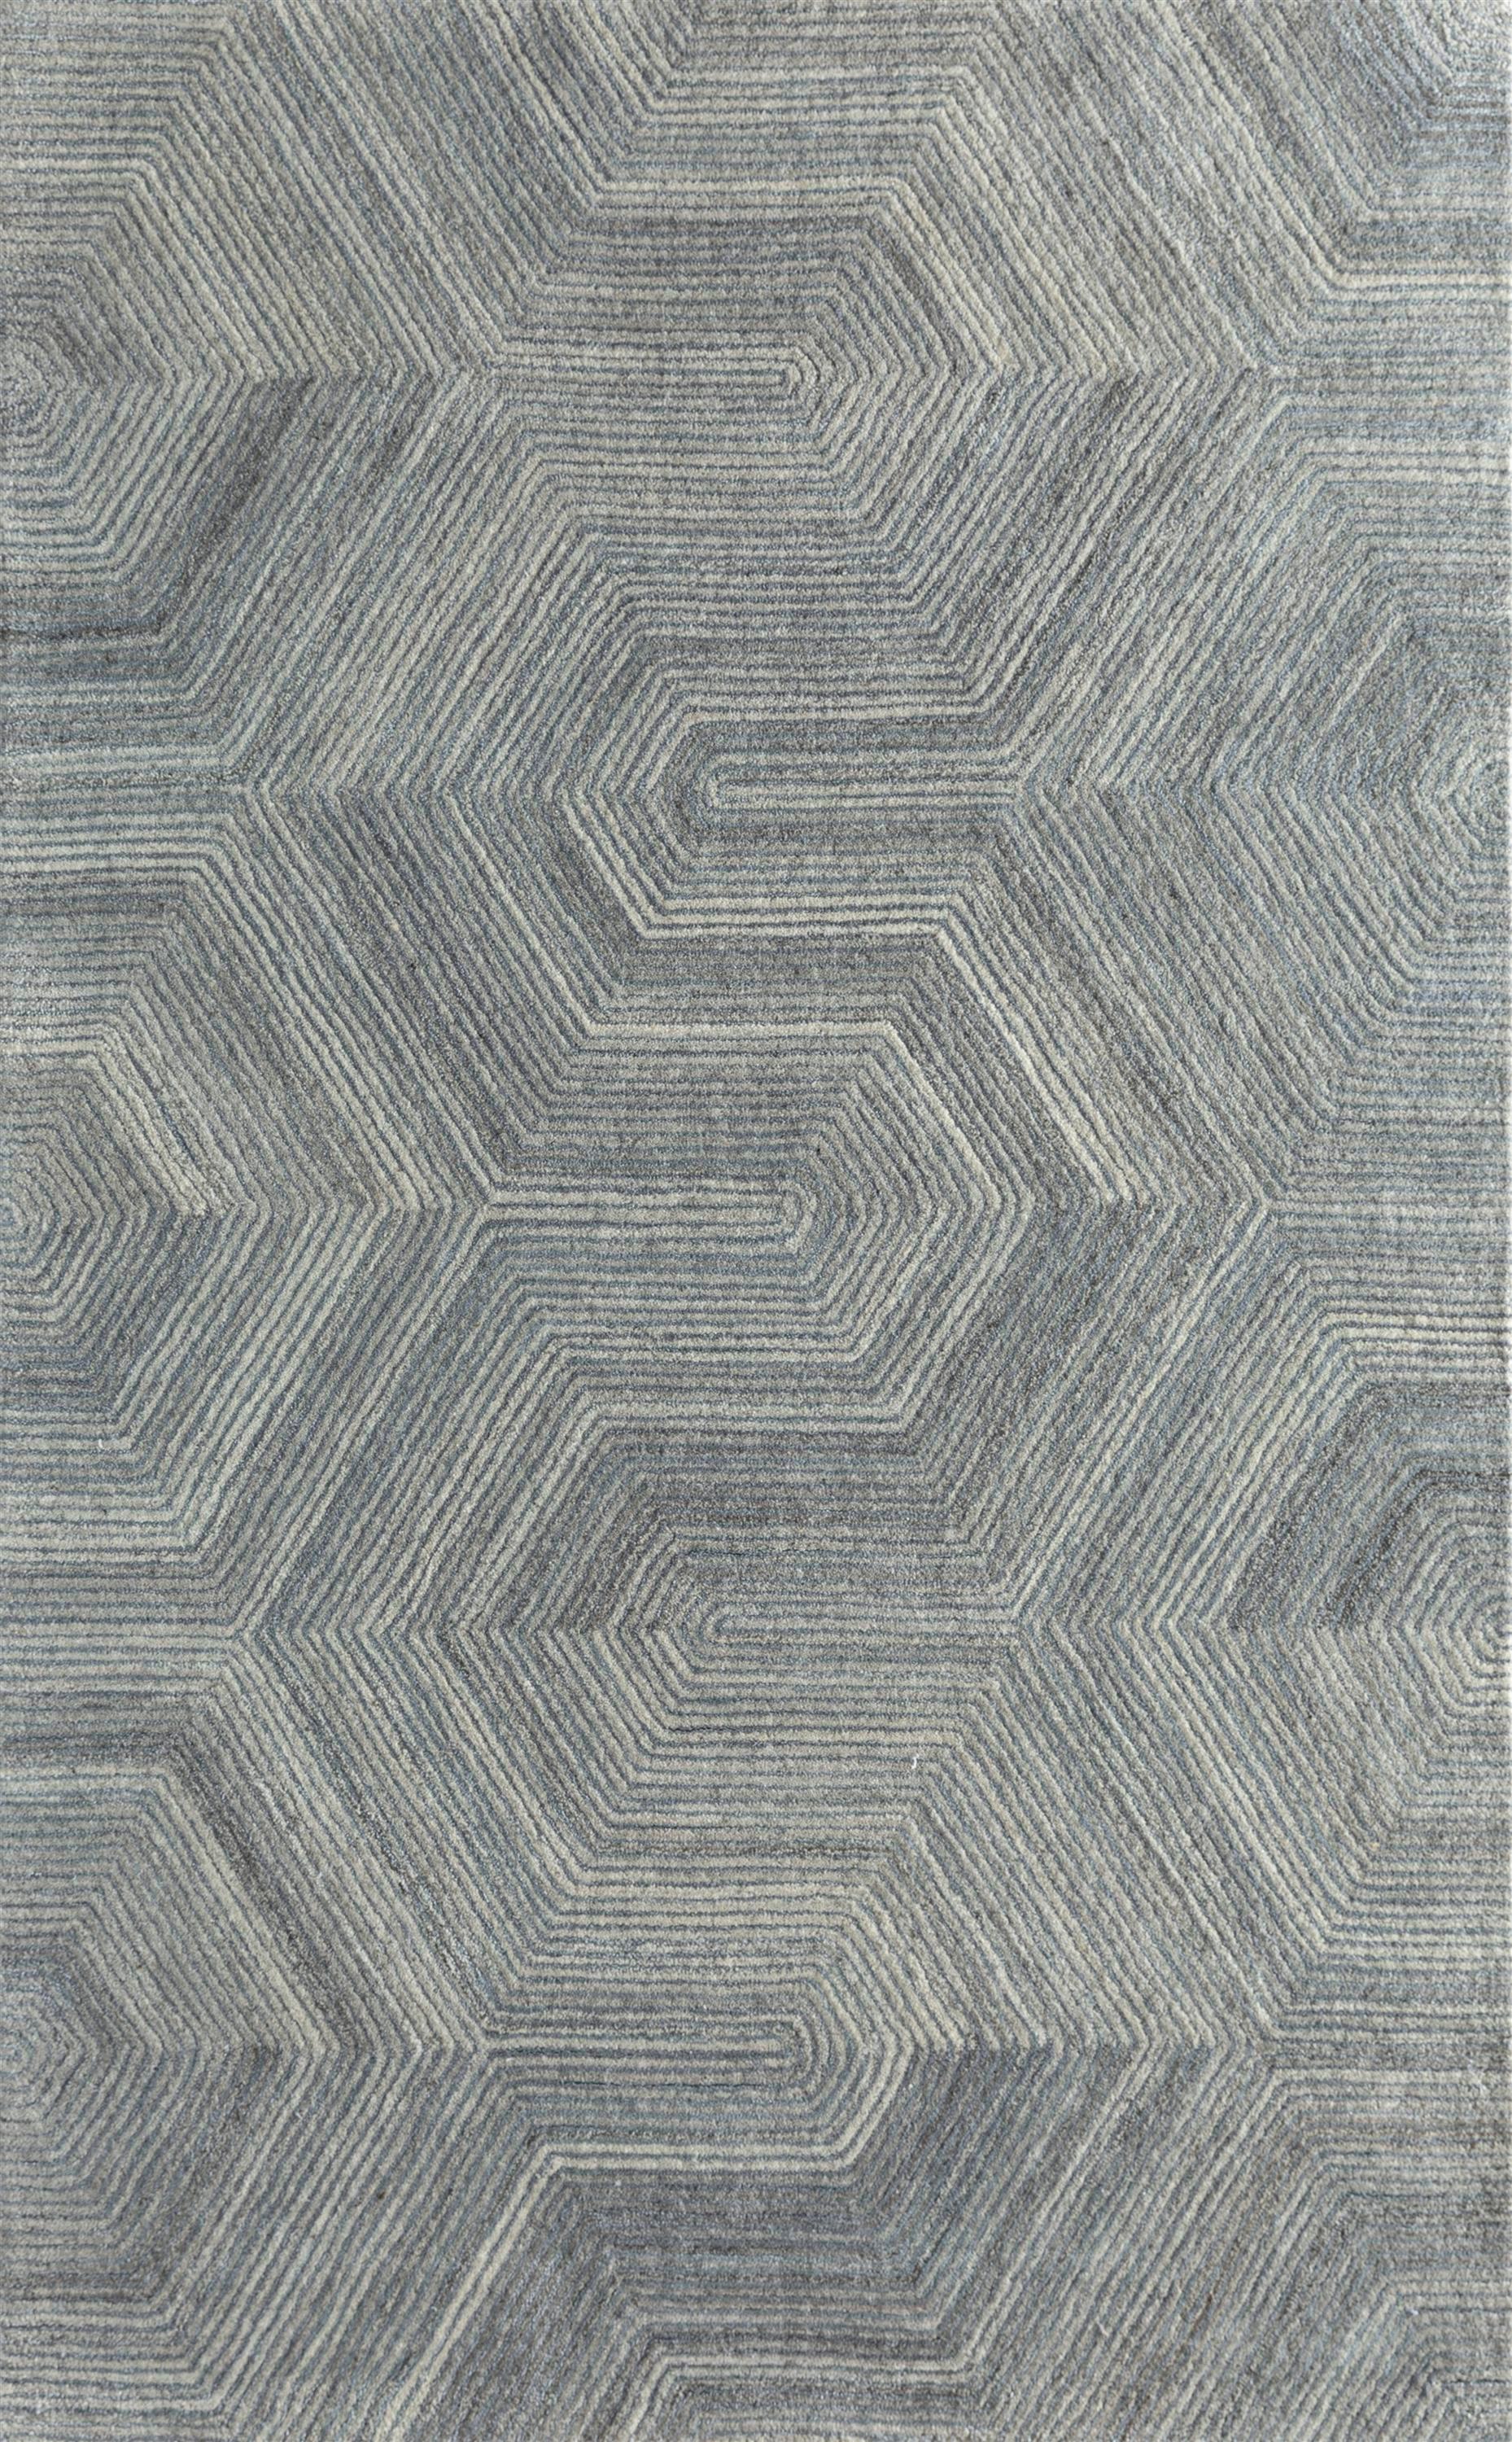 Ever wondered what happens when contemporary design meets architectural inspiration? This hand-tufted rug by Jaipur Rugs has the answer. Featuring an architecturally-inspired labyrinthine motif, this masterpiece unfolds a visual journey through